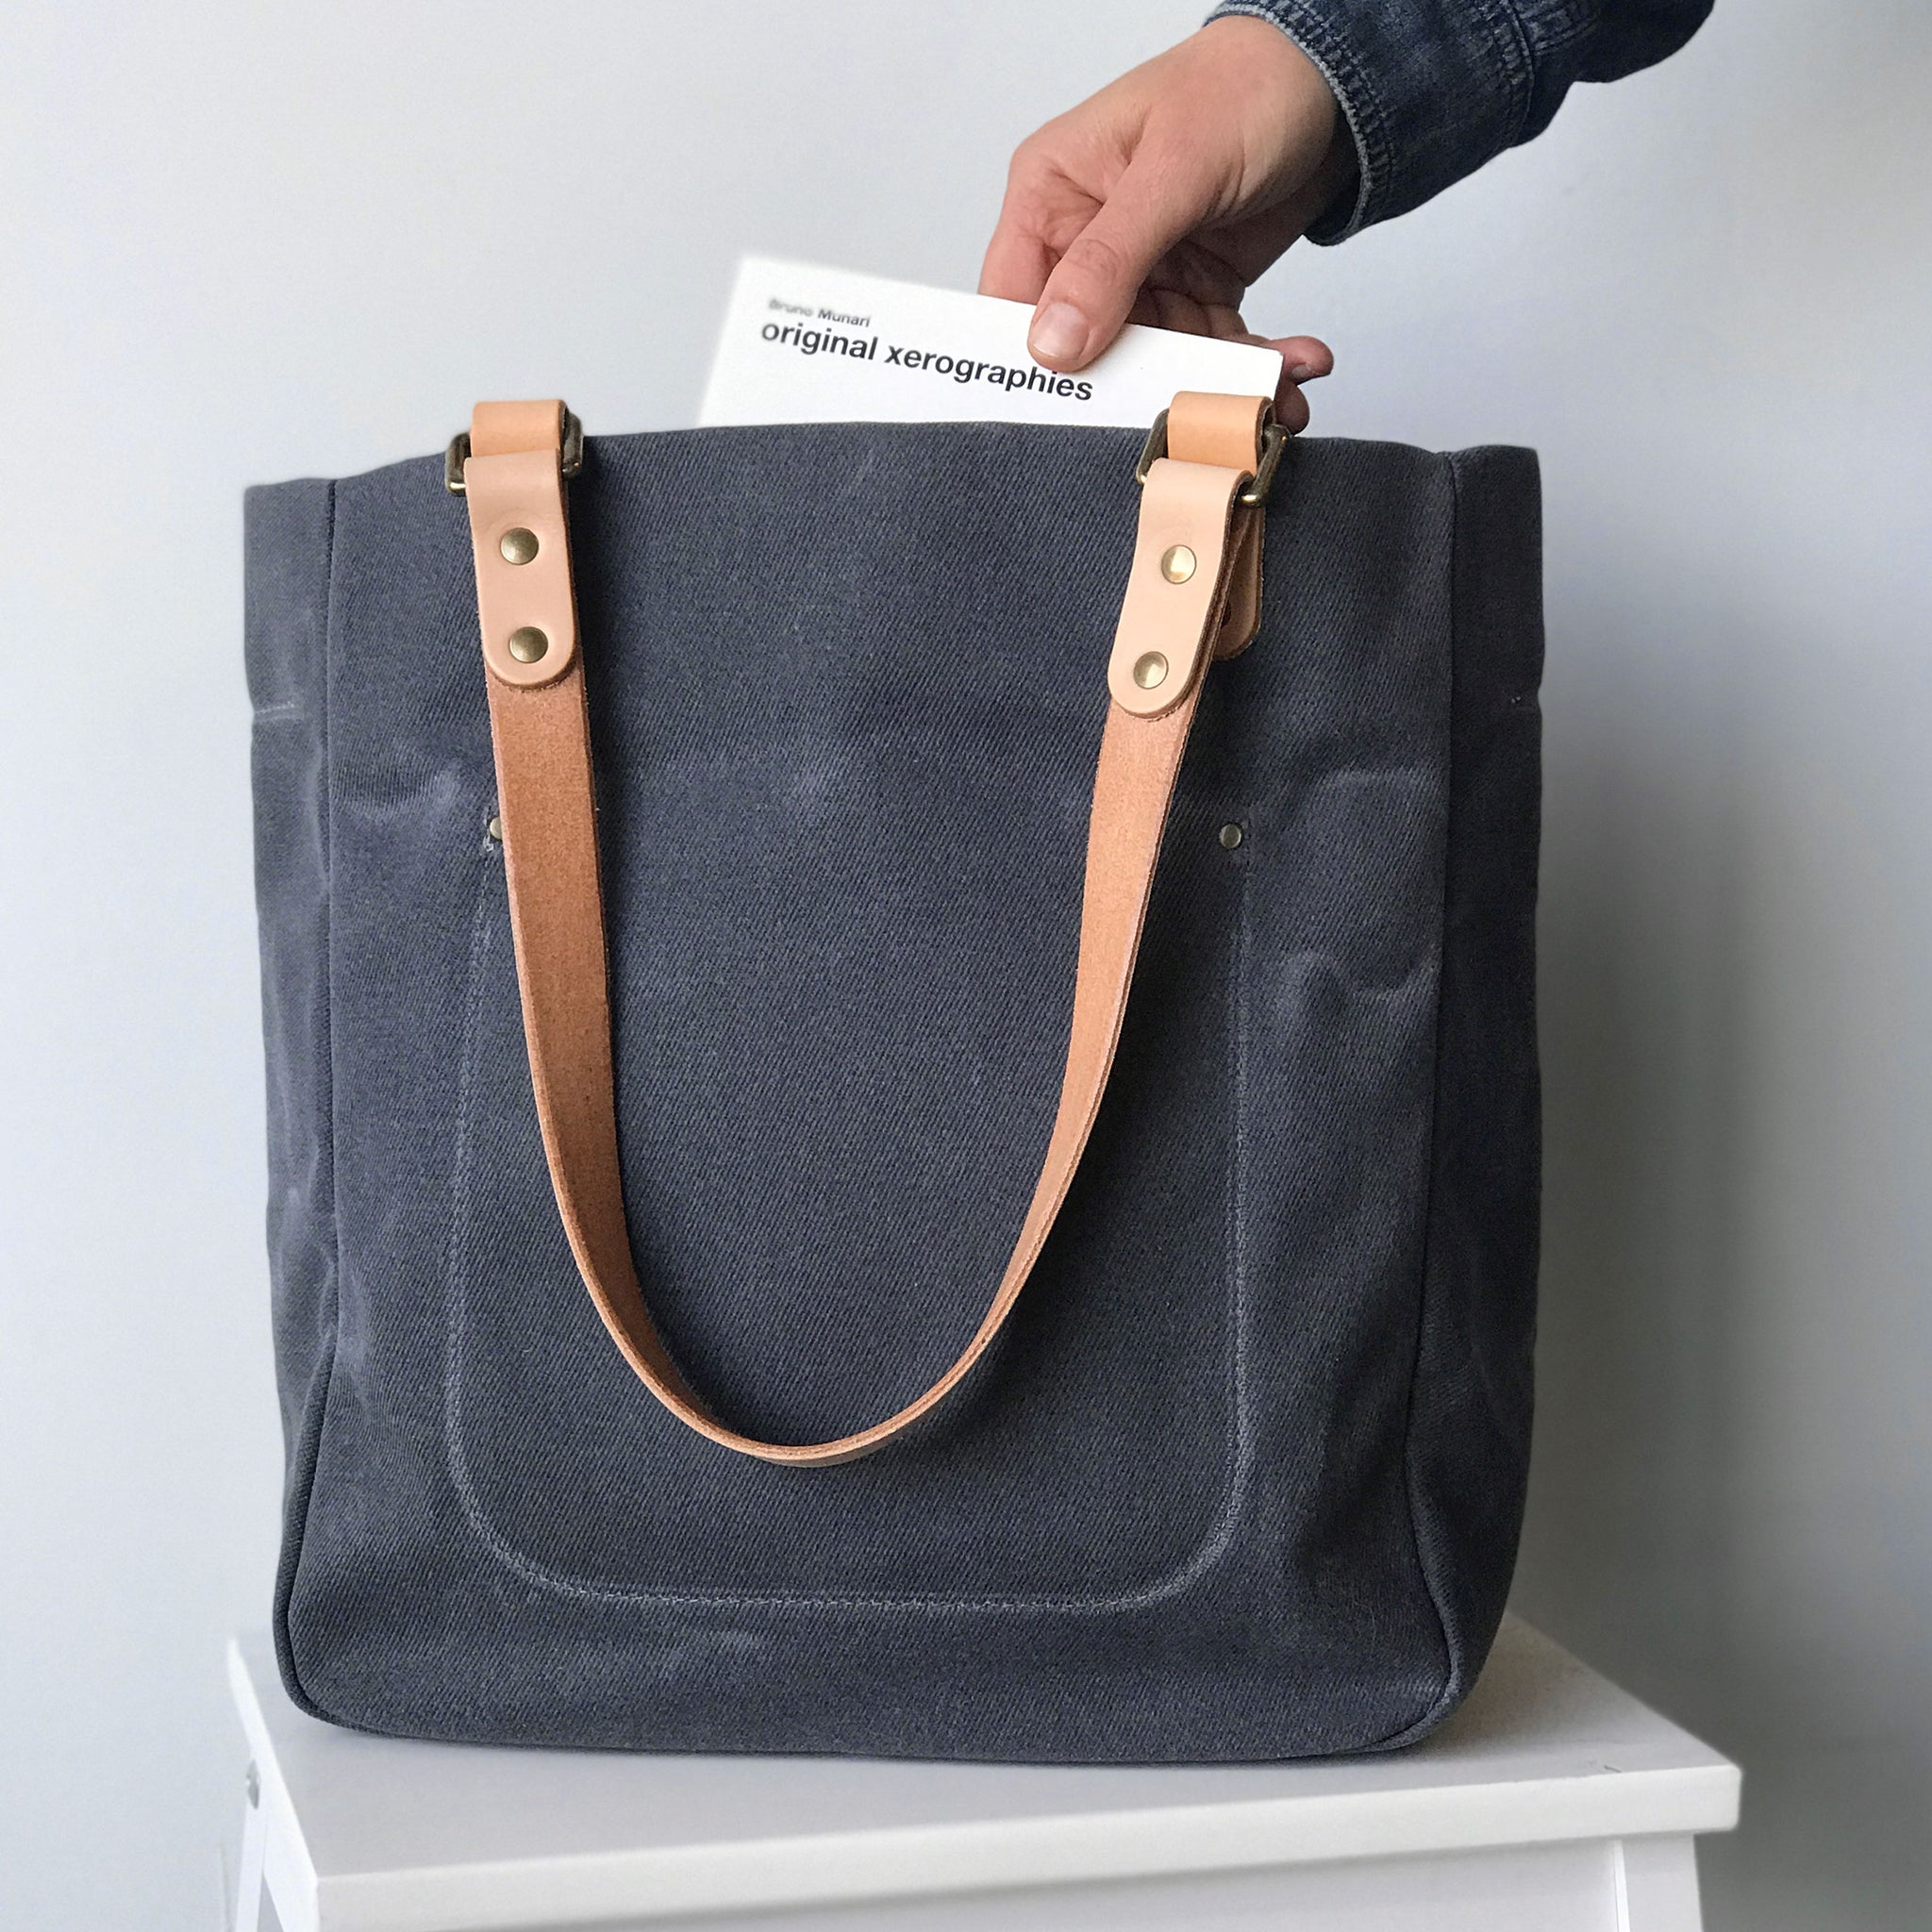 Waxed Canvas Utility Tote with Leather Handles | Made in Denver by Winter Session